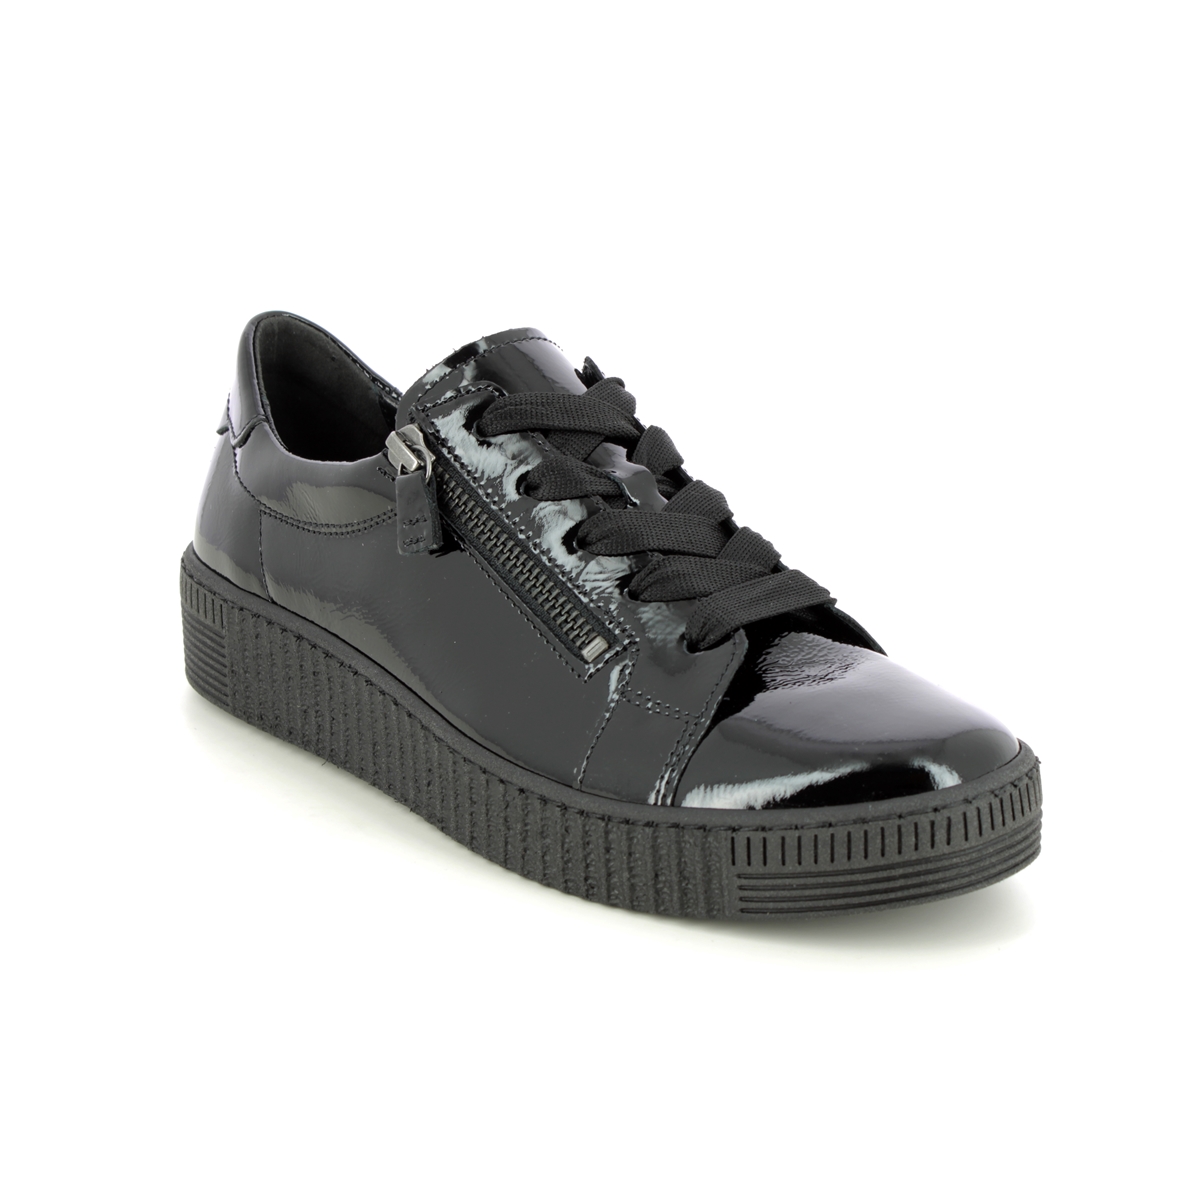 Gabor Wisdom Black Patent Womens Trainers 93.334.97 In Size 7.5 In Plain Black Patent  Womens Trainers In Soft Black Patent Leather